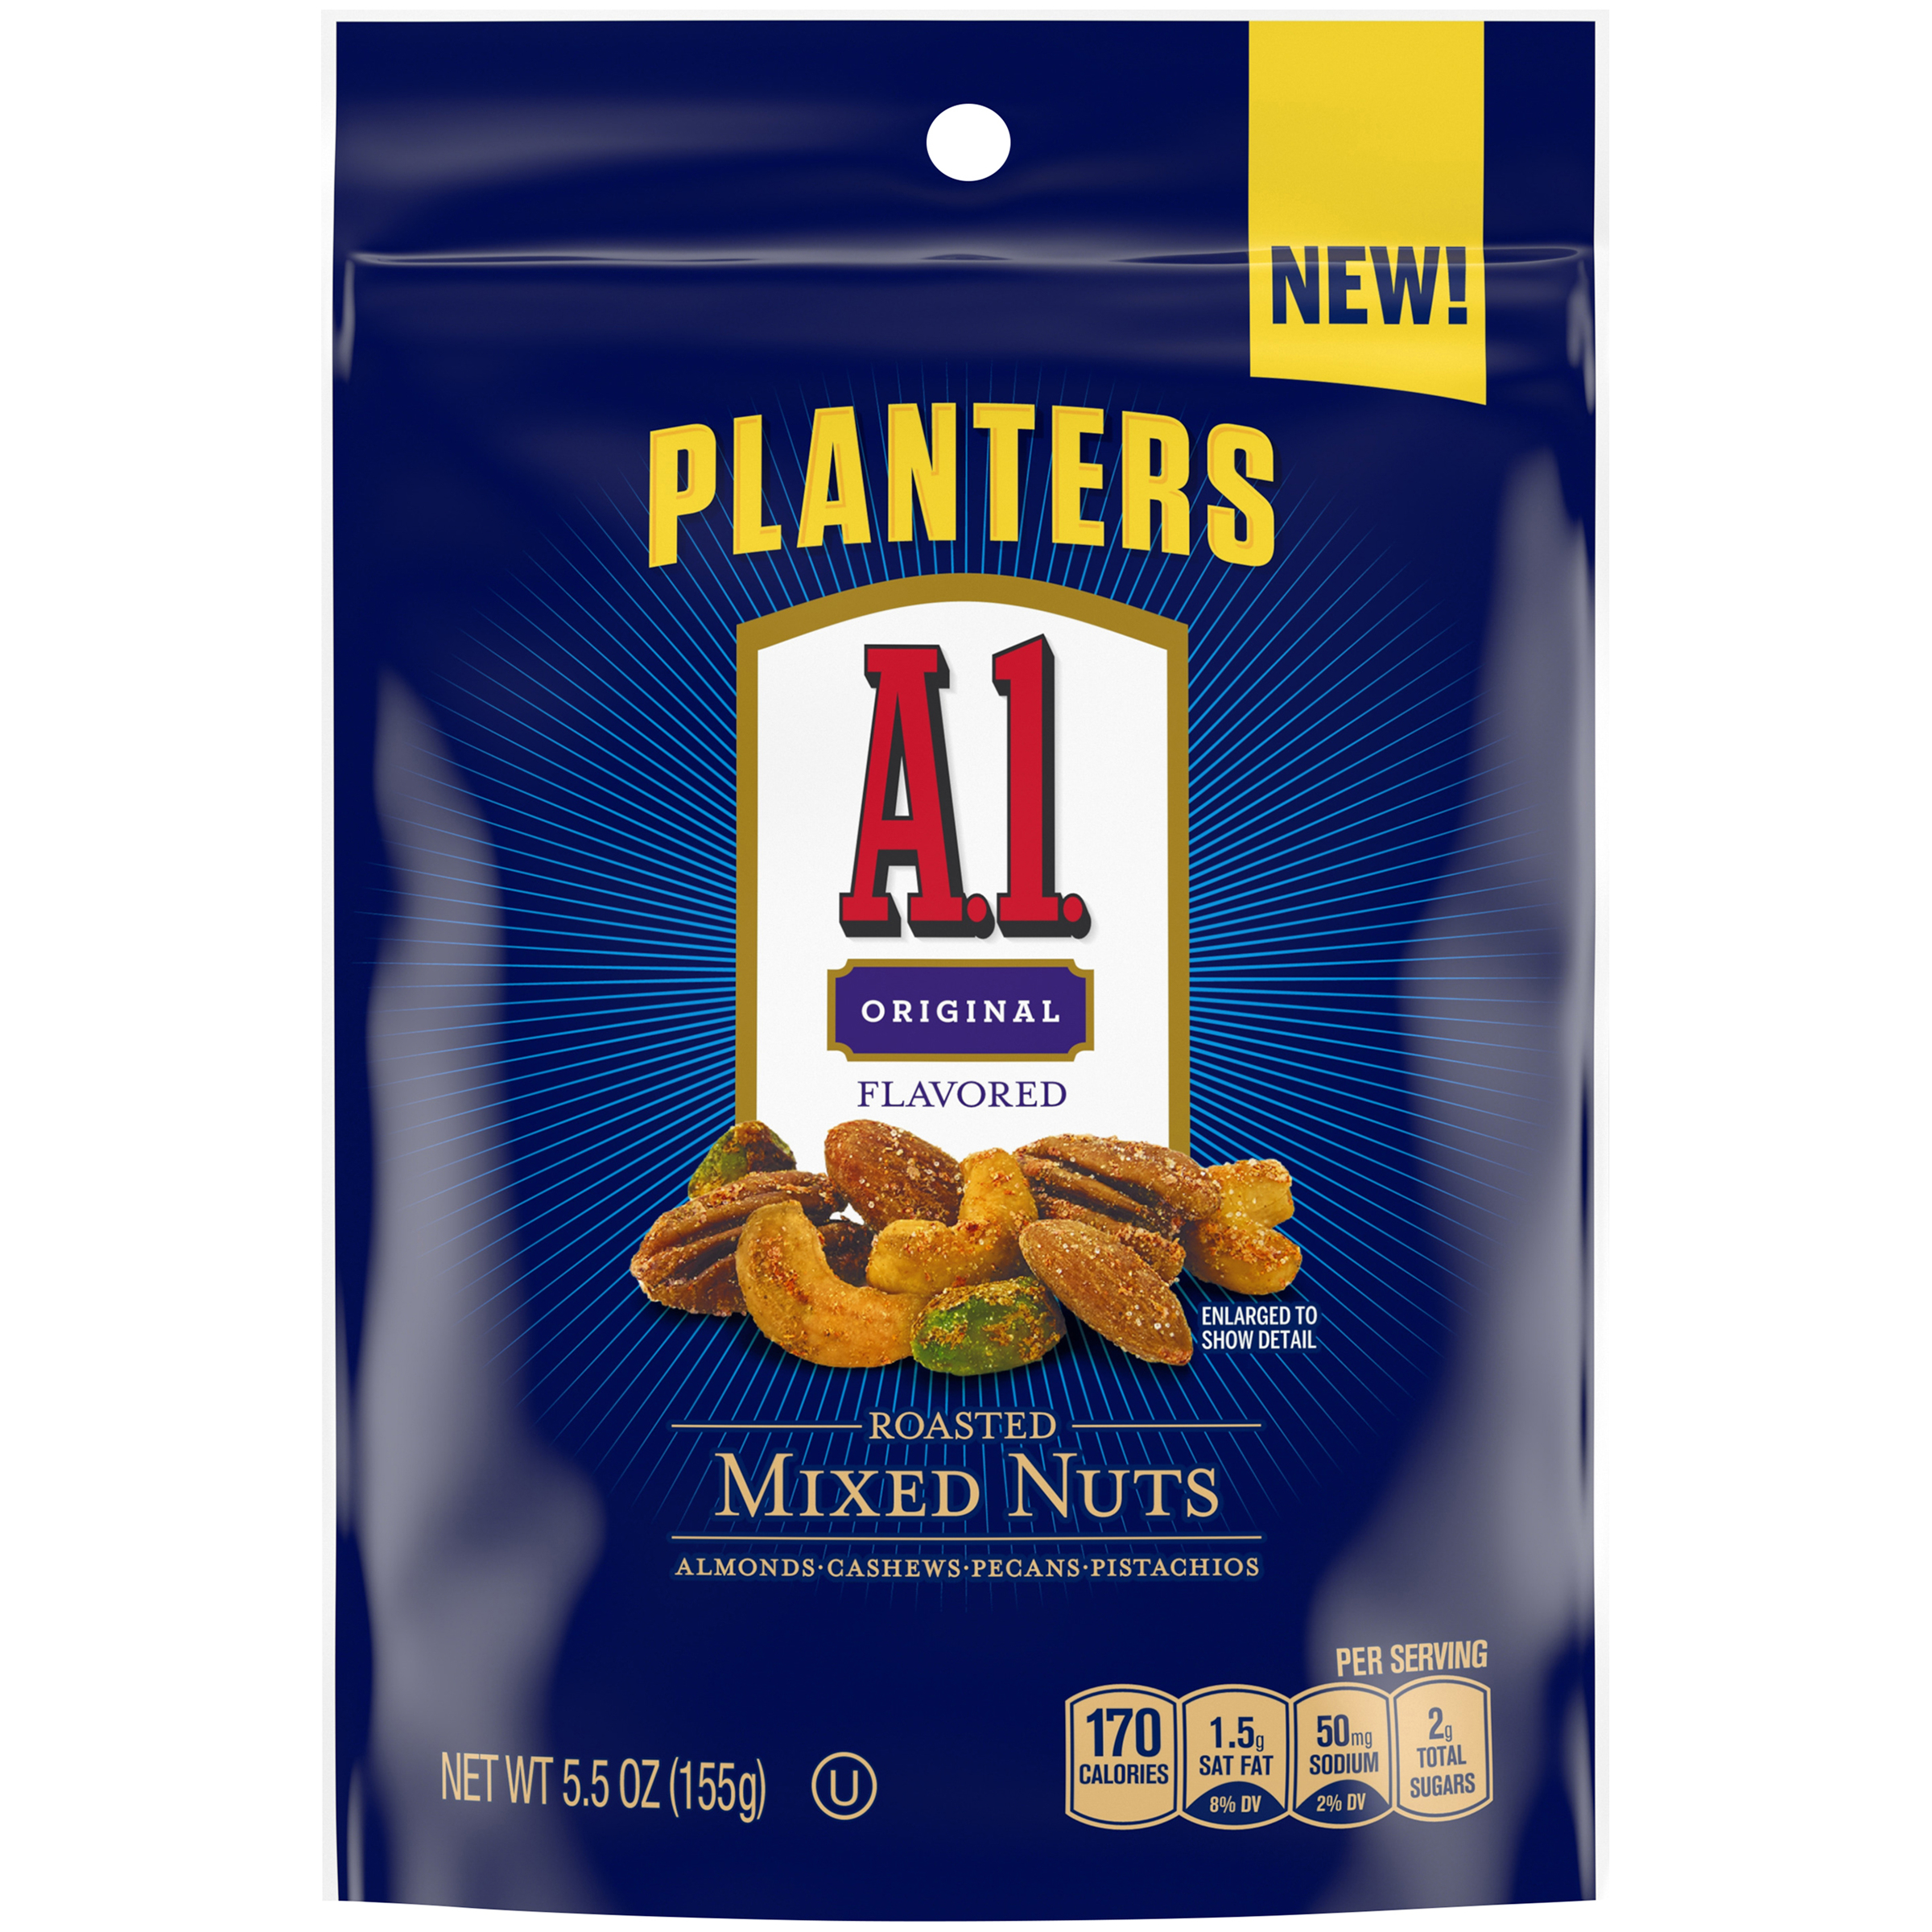 PLANTERS® A1 Sauce Flavored Roasted Mixed Nuts 5 oz bag